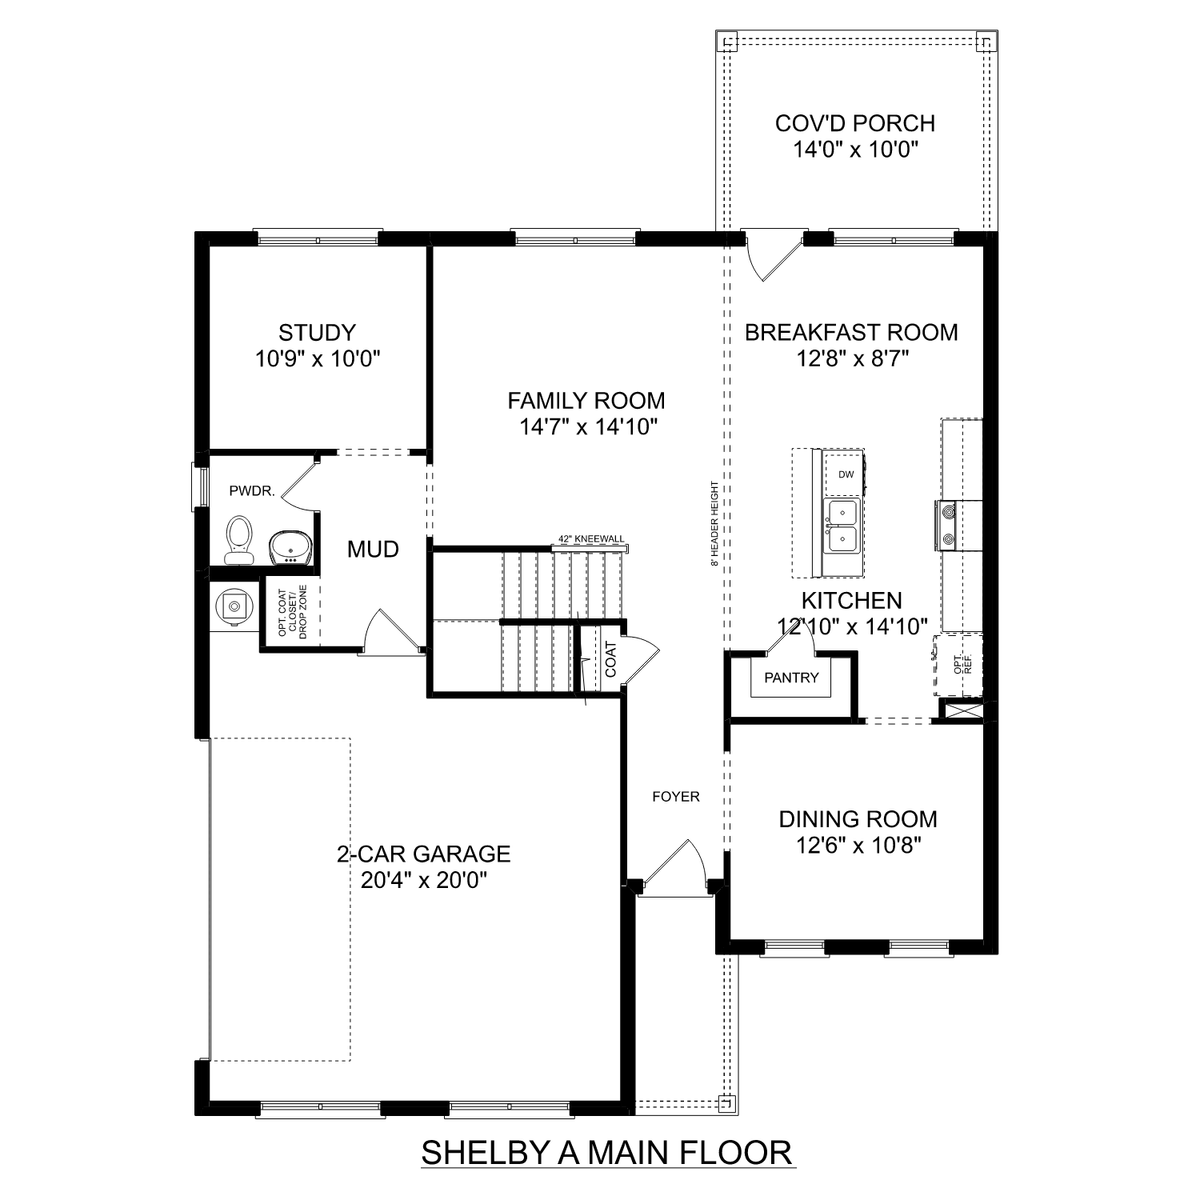 1 - The Shelby A - Side Entry floor plan layout for 306 Creek Grove Avenue in Davidson Homes' Creek Grove community.